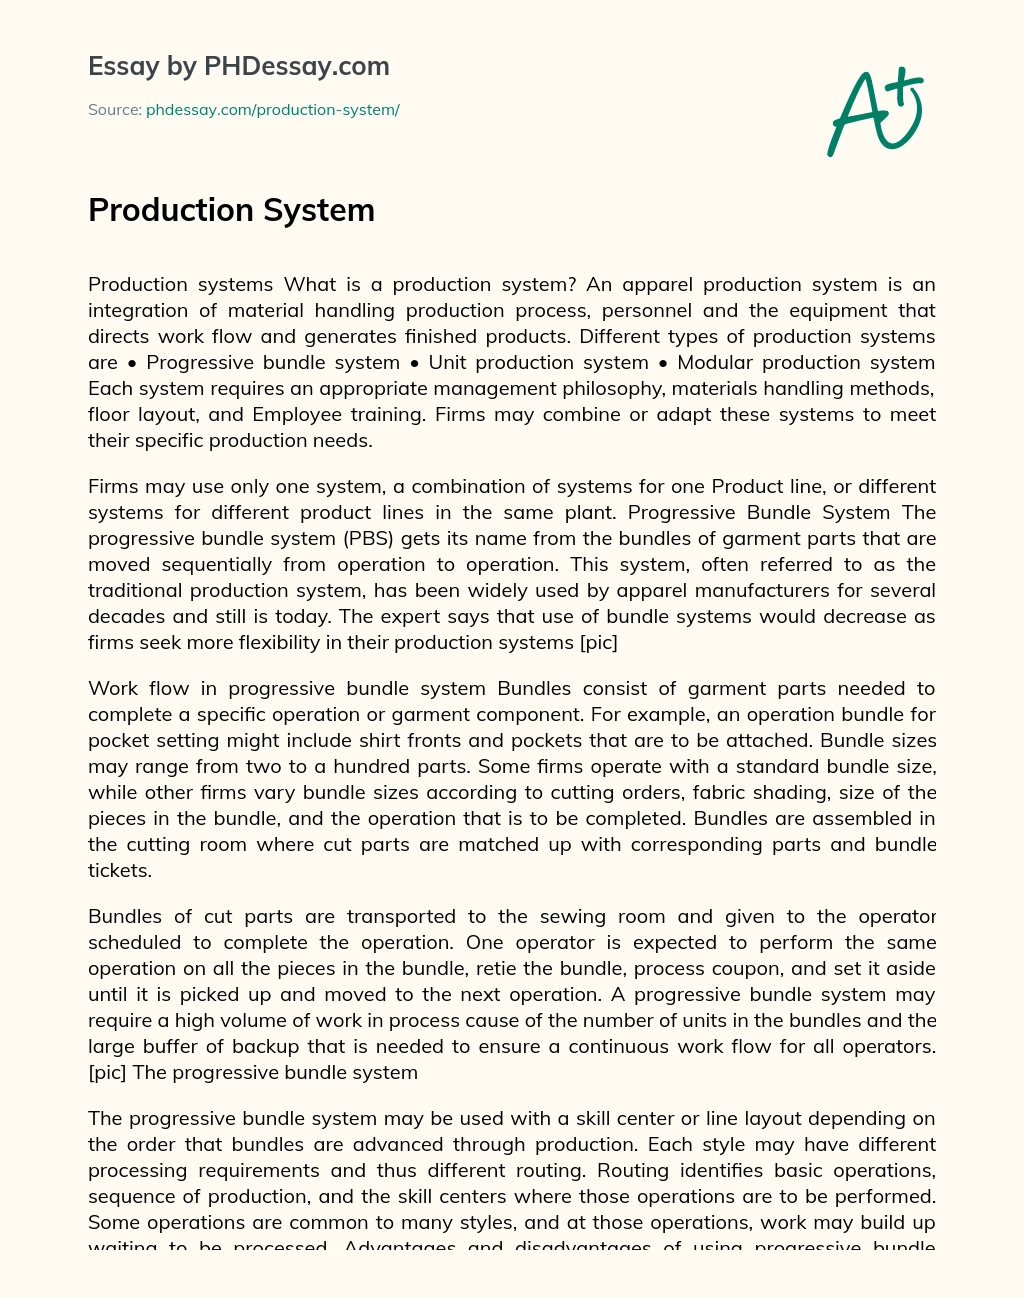 Production System essay